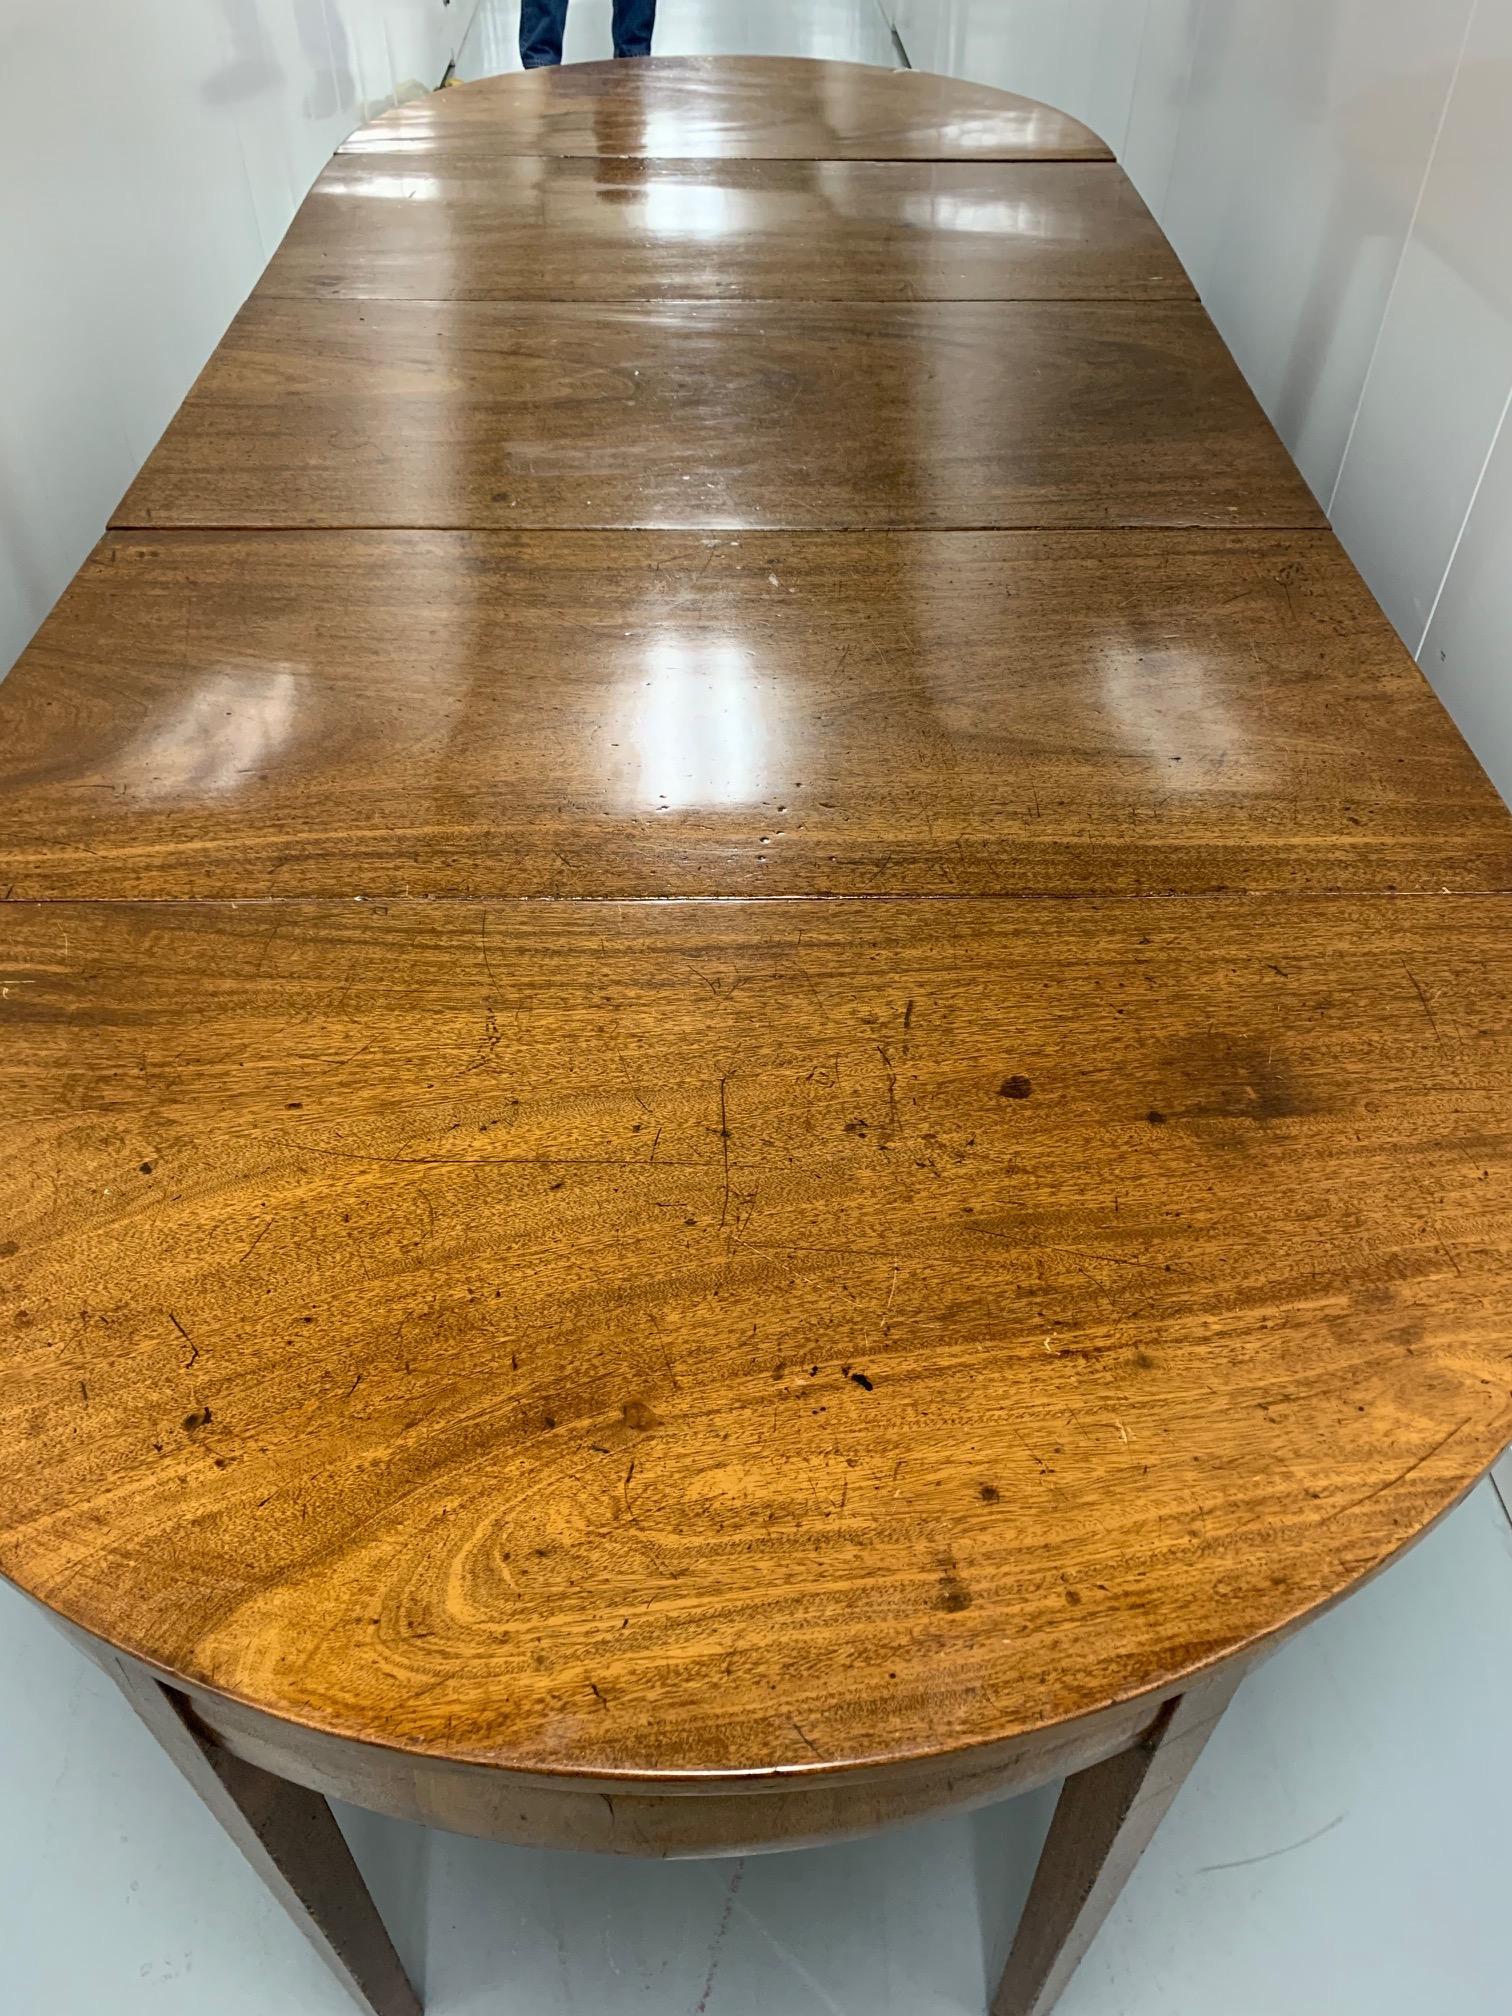 A gorgeous extremely versatile 19th century mahogany Hepplewhite dining table that is a roomy 8 1/2 feet when fully extended. The table is a wonderful design with two beautiful removable demilunes that are added at each end for extension purposes.